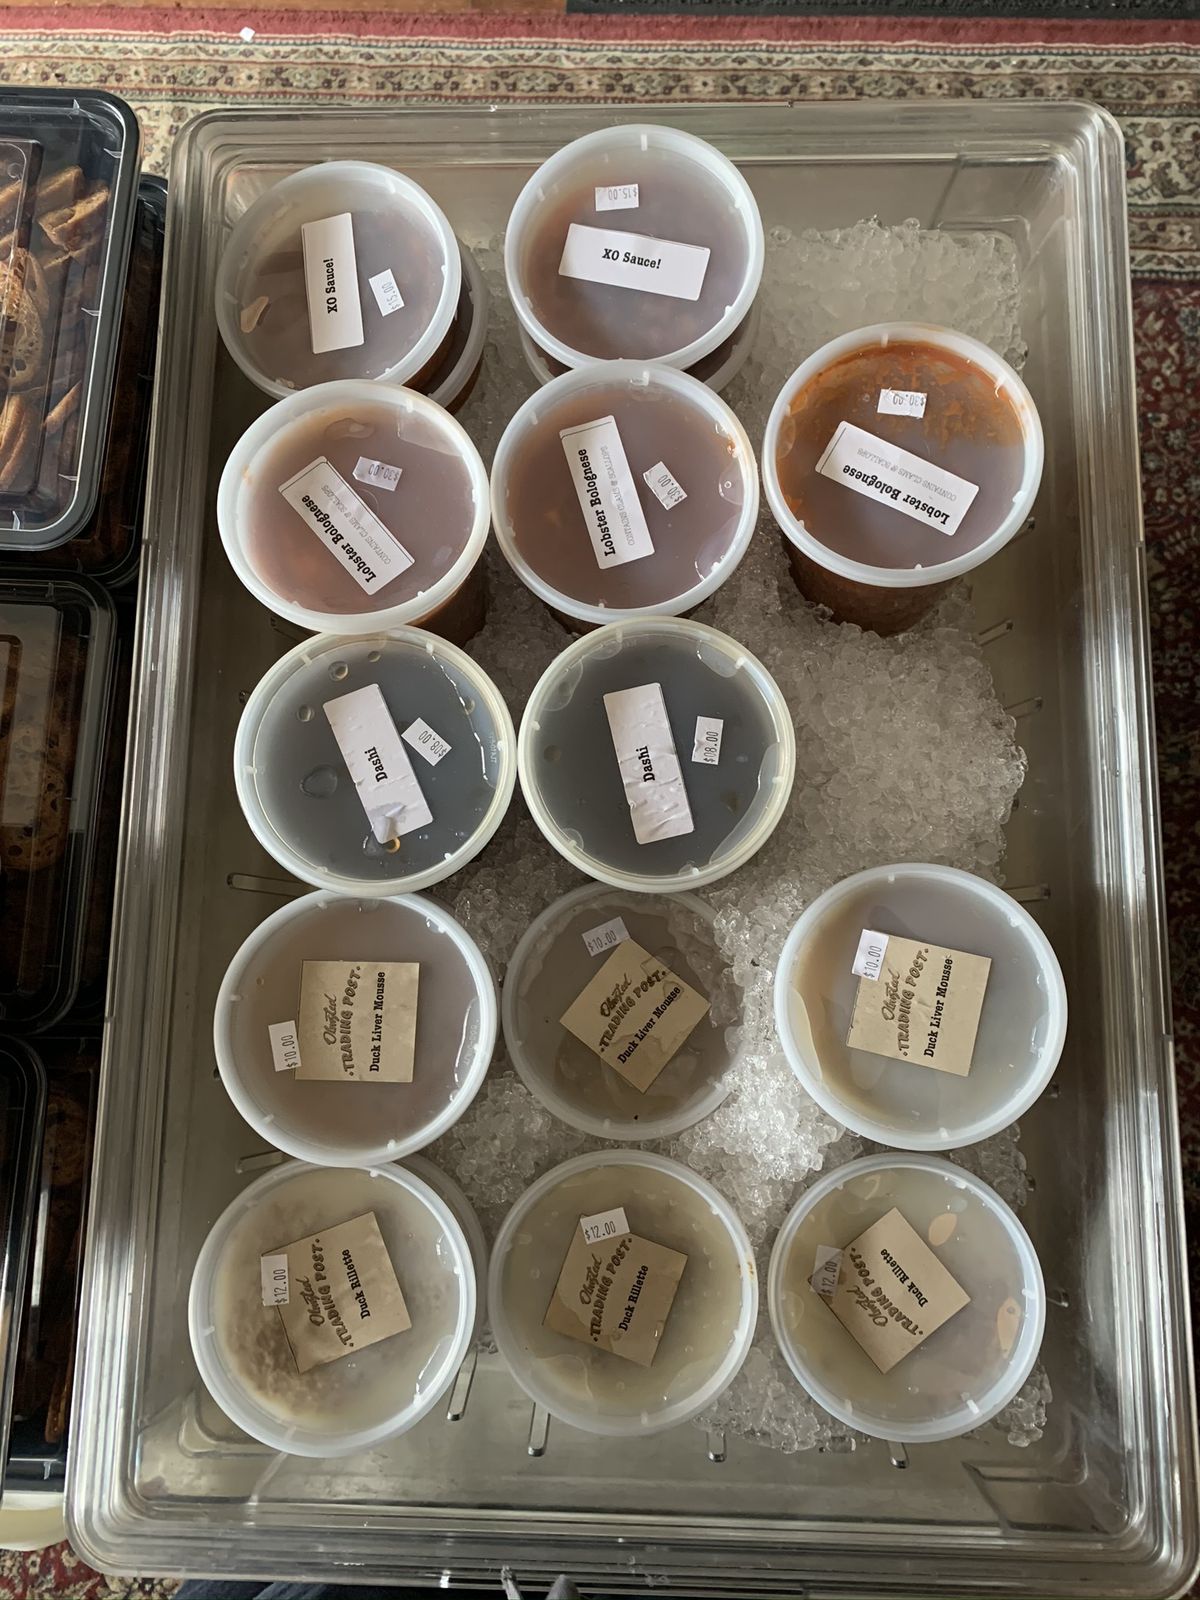 A tray filled with ice containing boxes of condiments in plastic containers